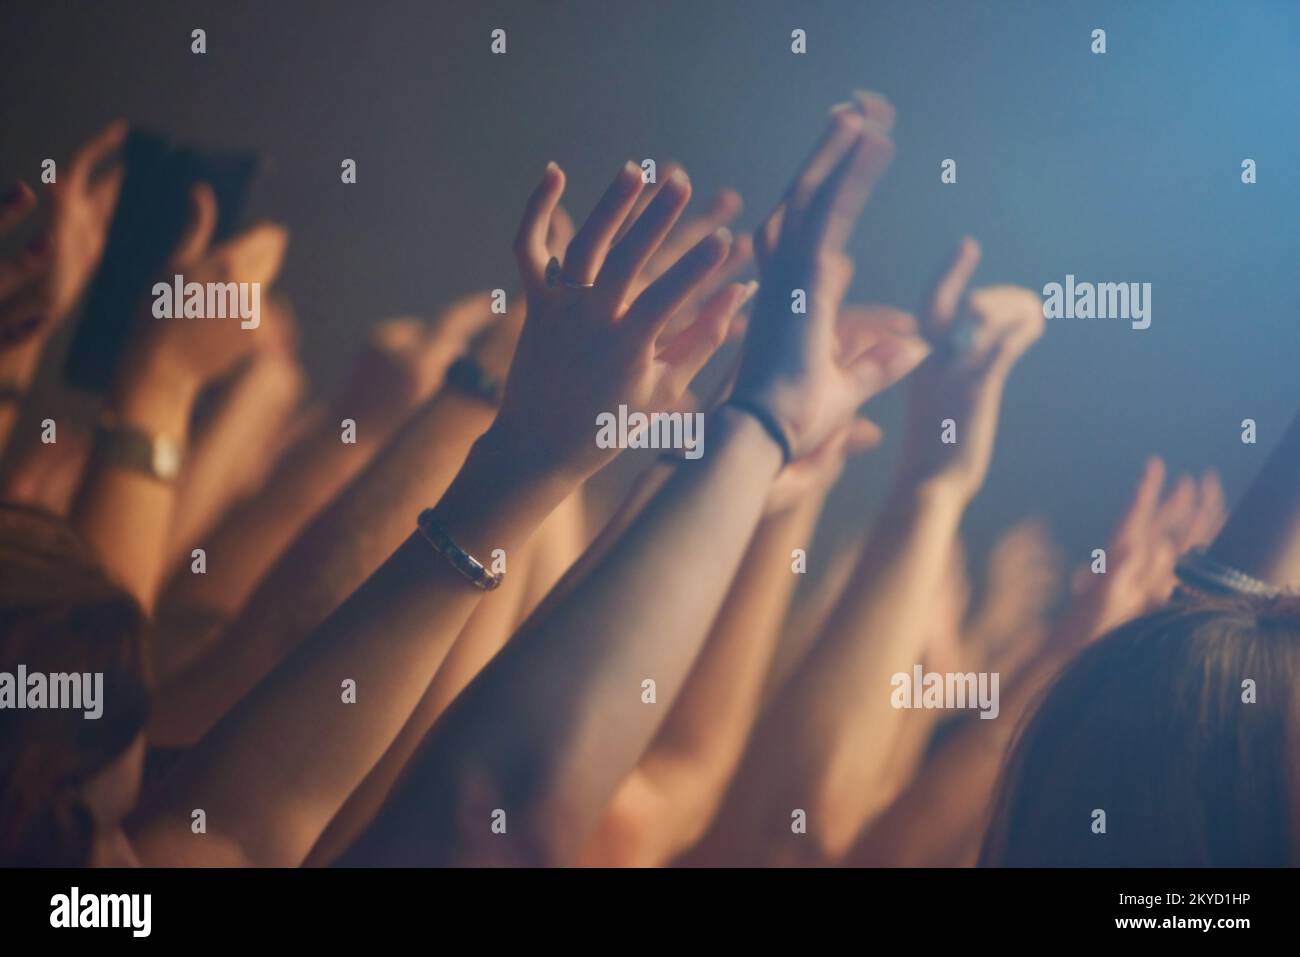 Feeling the music. An excited crowd raising their hands and reaching out to their favourite band. Stock Photo